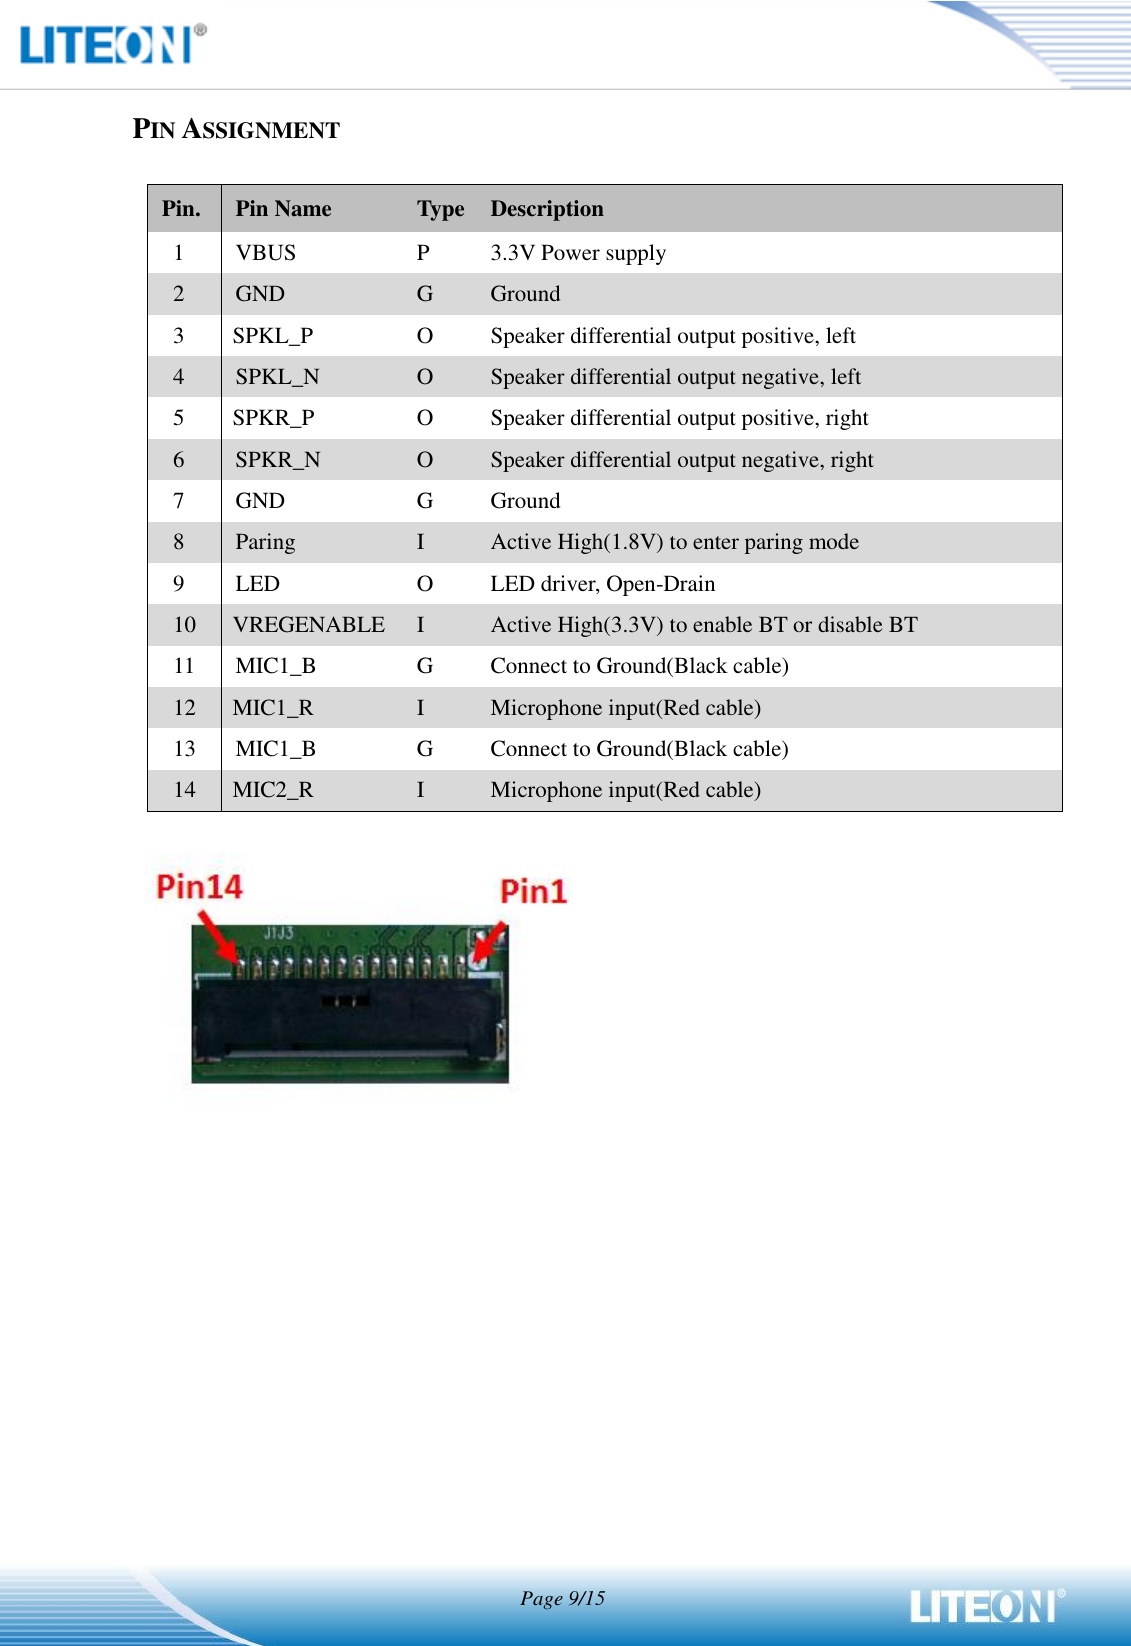                                   Page 9/15   PIN ASSIGNMENT    Pin. Pin Name Type Description 1 VBUS P 3.3V Power supply 2 GND G Ground 3 SPKL_P O Speaker differential output positive, left 4 SPKL_N O Speaker differential output negative, left 5 SPKR_P O Speaker differential output positive, right 6 SPKR_N O Speaker differential output negative, right 7 GND G Ground 8 Paring I Active High(1.8V) to enter paring mode 9 LED O LED driver, Open-Drain 10 VREGENABLE I Active High(3.3V) to enable BT or disable BT 11 MIC1_B G Connect to Ground(Black cable) 12 MIC1_R I Microphone input(Red cable) 13 MIC1_B G Connect to Ground(Black cable) 14 MIC2_R I Microphone input(Red cable)   